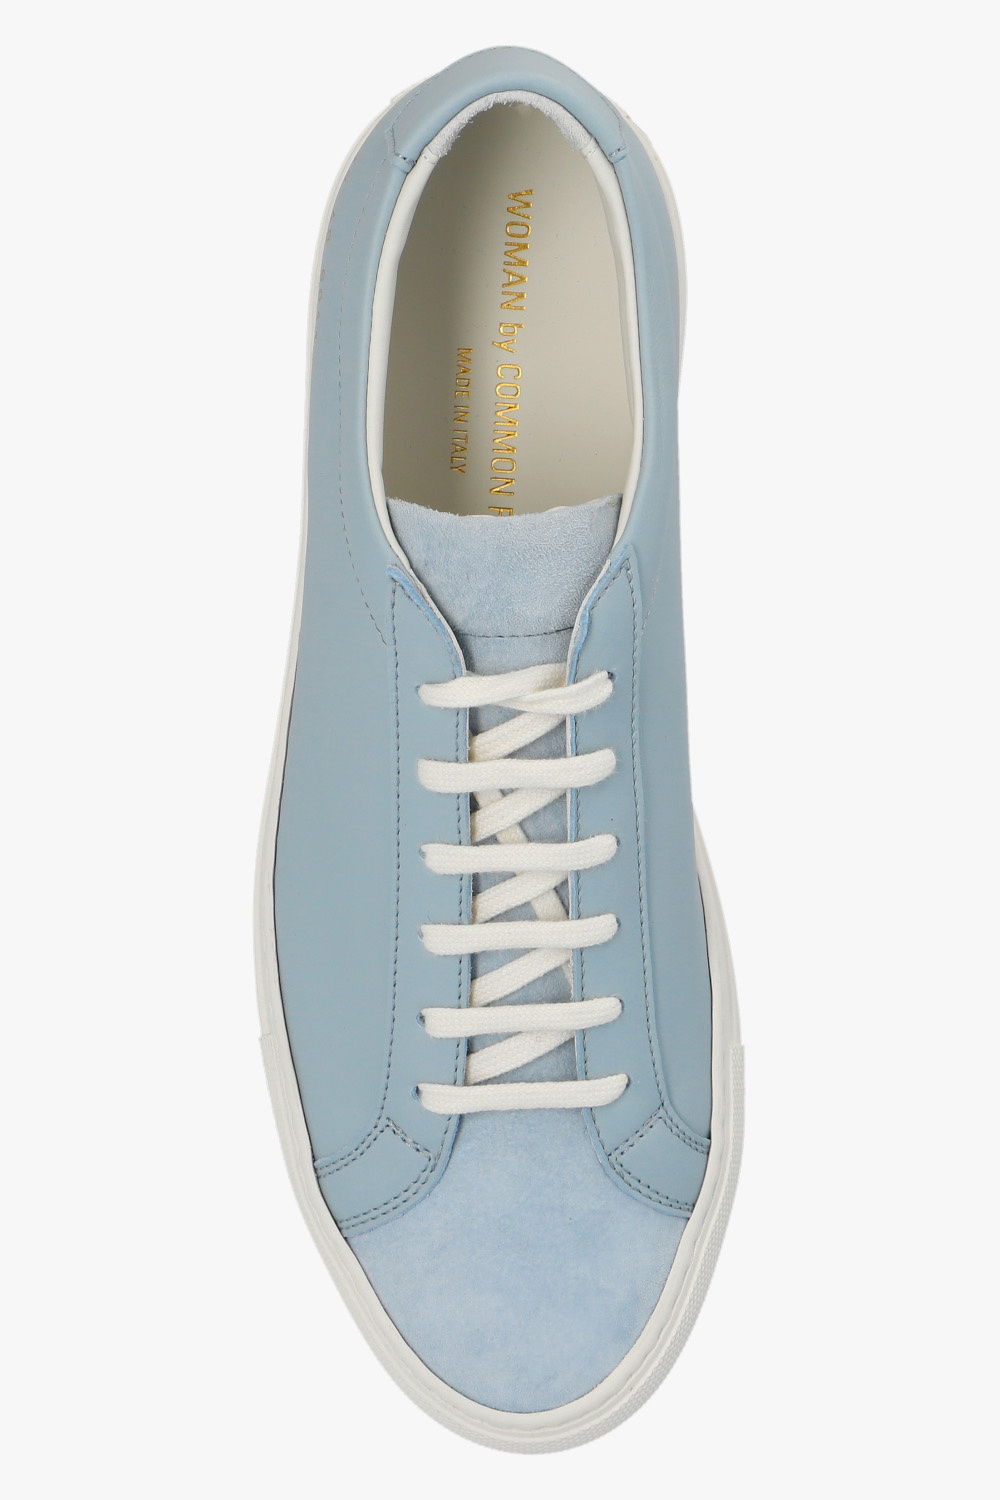 Common Projects ‘Original Achilles’ sneakers